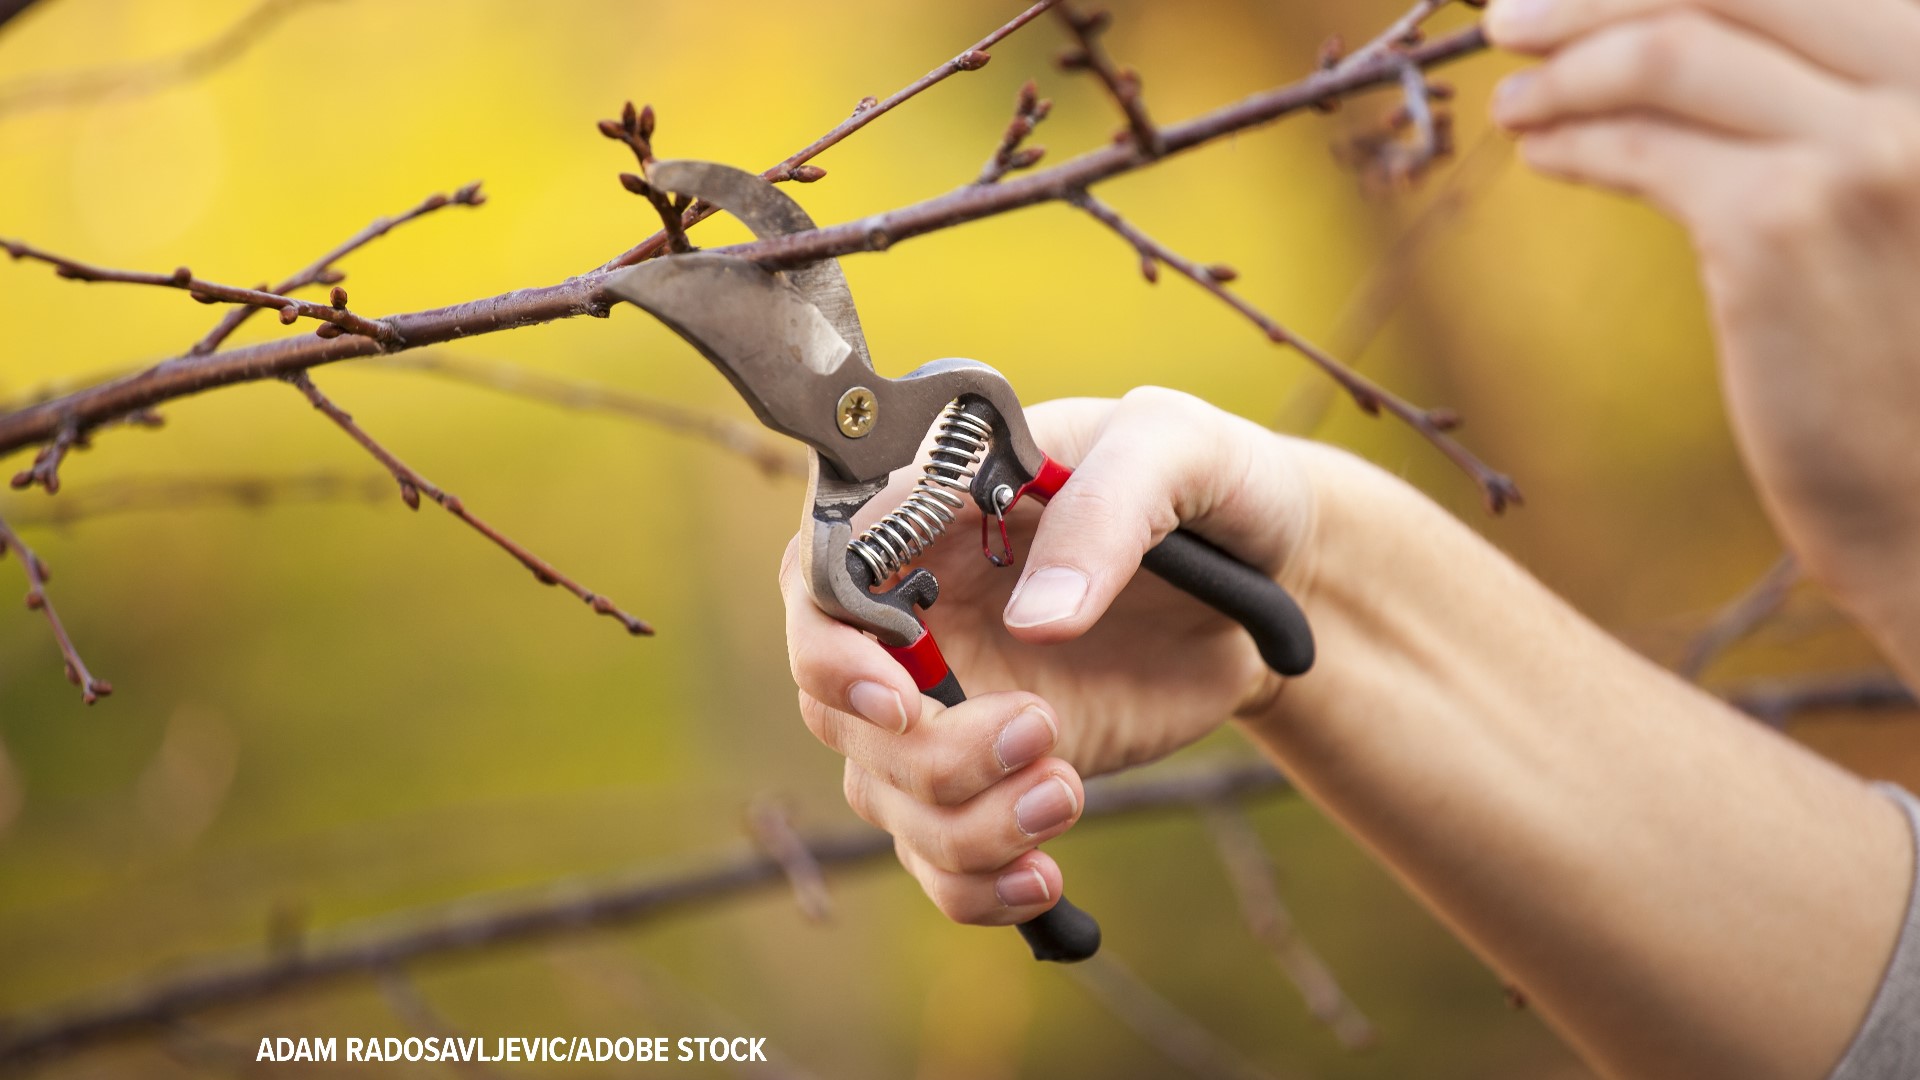 Cold weather has been hampering some spring landscape projects, but Pat Sullivan said you can get out the pruners and fertilize now.